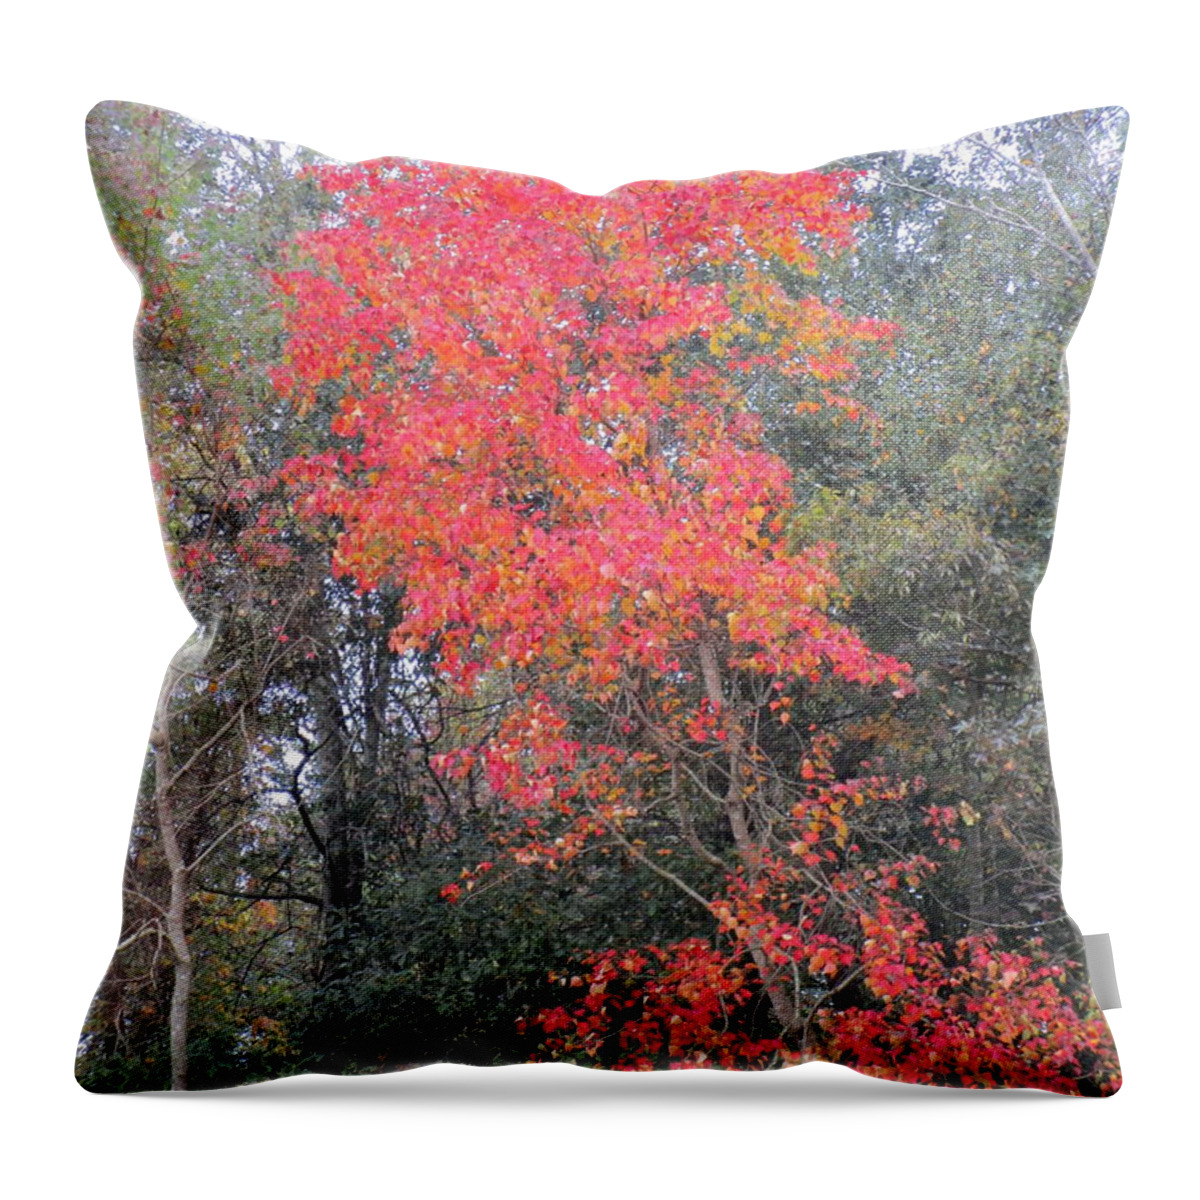 Chicken Tree Ablaze With Color Throw Pillow featuring the photograph Chicken Tree Ablaze With Color by Seaux-N-Seau Soileau